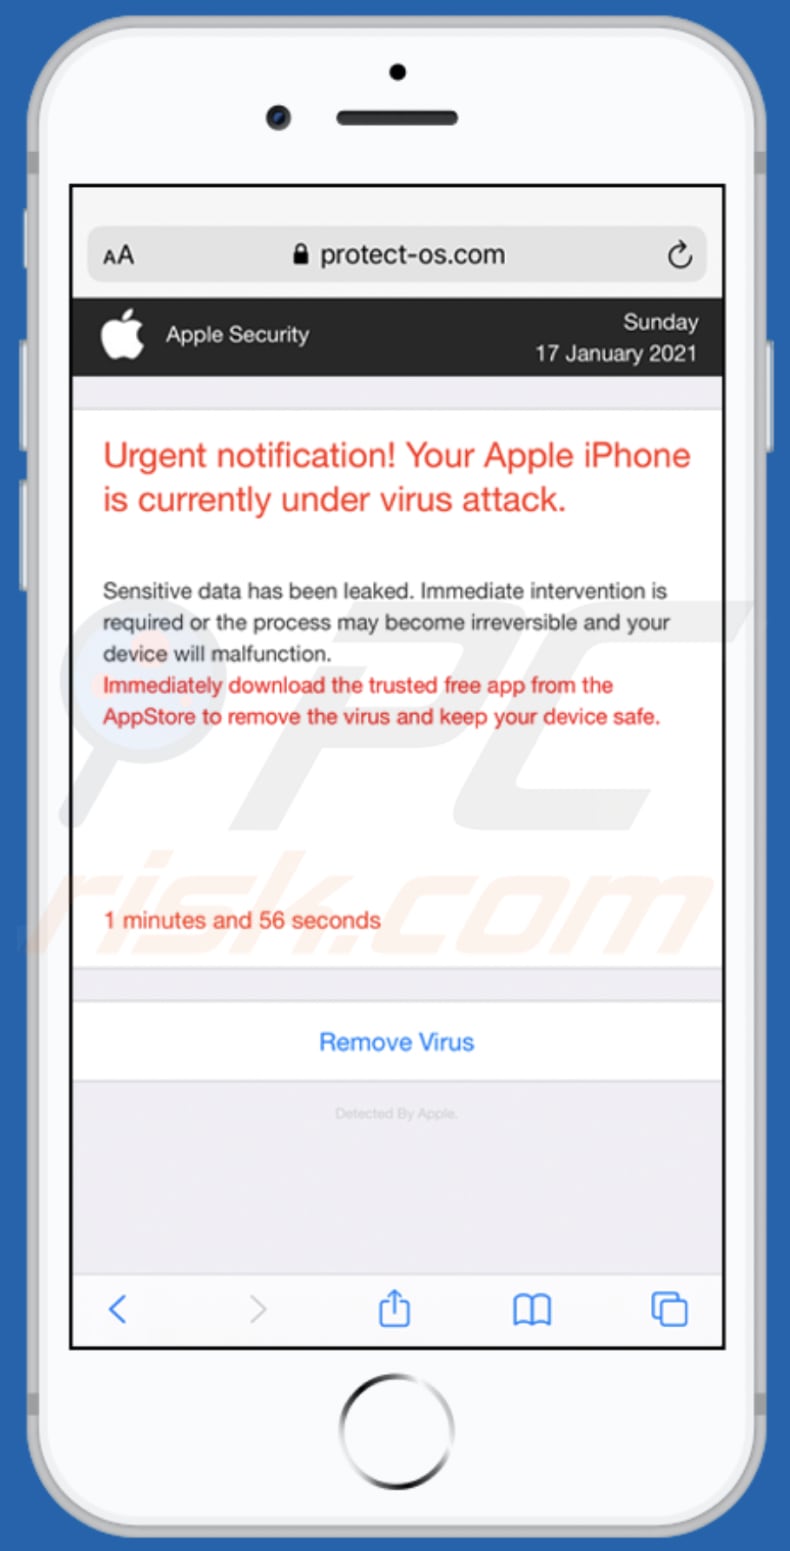 fraude Your Apple iPhone is currently under virus attack